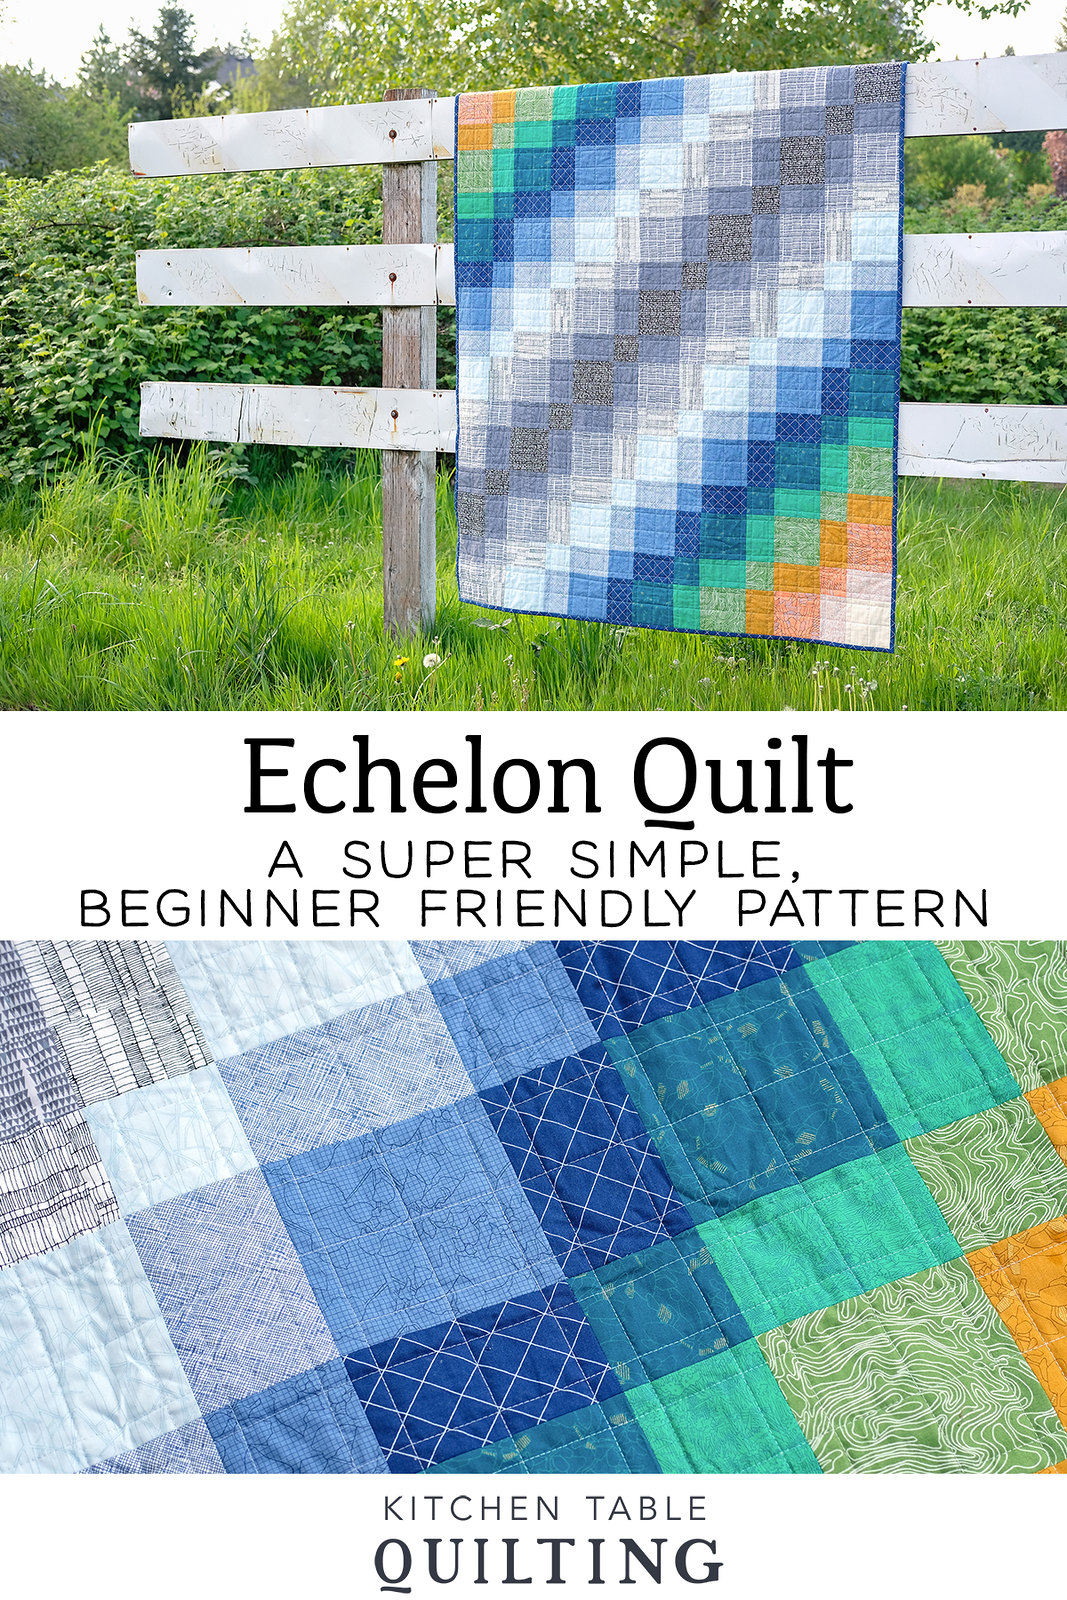 Echelon - A Super Simple, Beginner Friendly Pattern by Kitchen Table Quilting